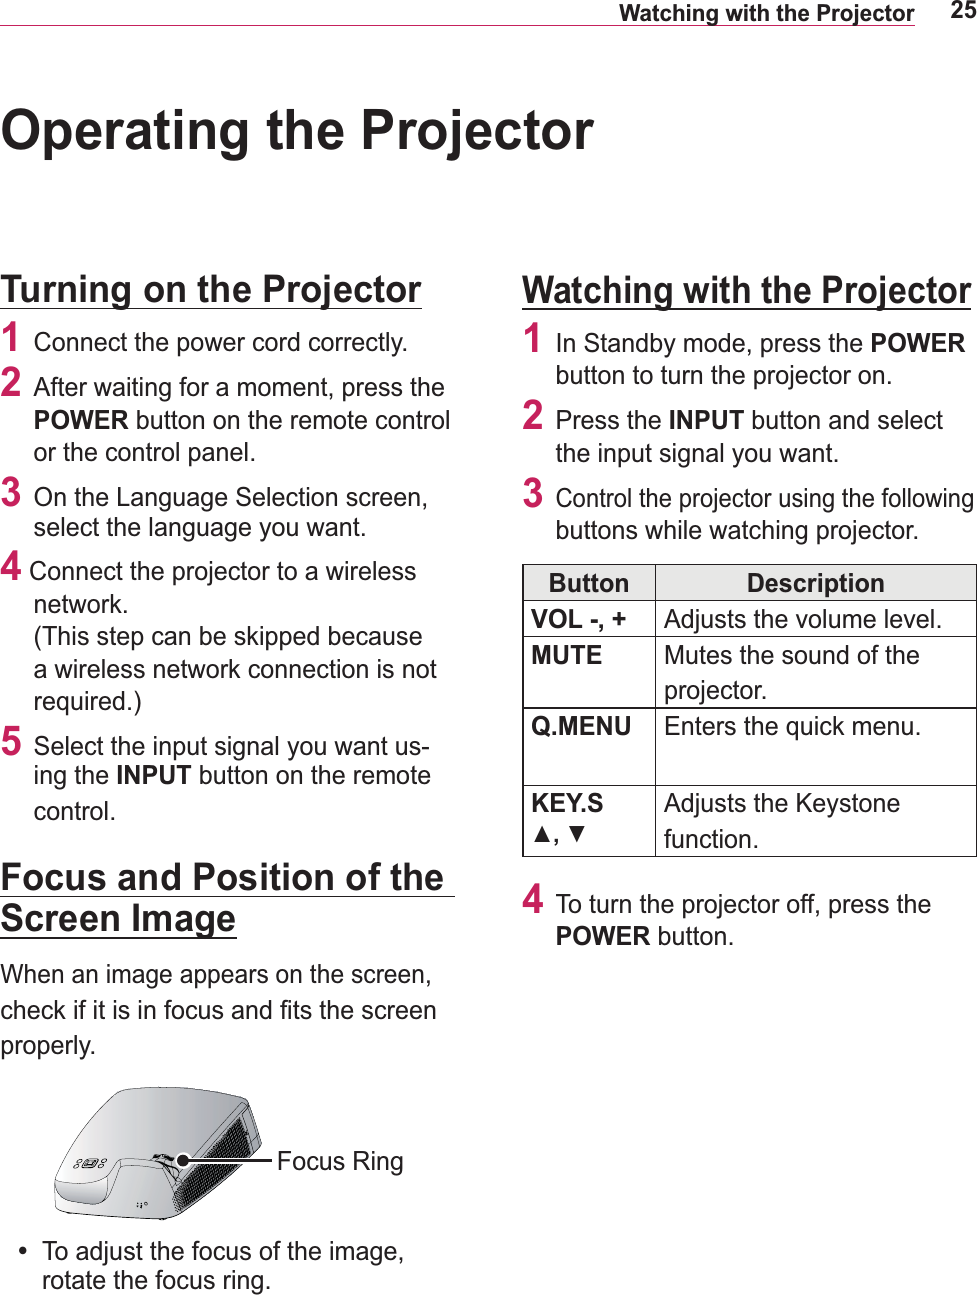 25Watching with the ProjectorOperating the ProjectorTurning on the Projector1  Connect the power cord correctly.2  After waiting for a moment, press the POWER button on the remote control or the control panel. 3  On the Language Selection screen, select the language you want.4  Connect the projector to a wireless network. (This step can be skipped because a wireless network connection is not required.)5  Select the input signal you want us-ing the INPUT button on the remote control.Focus and Position of the Screen ImageWhen an image appears on the screen, properly.Focus Ringy To adjust the focus of the image, rotate the focus ring.Watching with the Projector1  In Standby mode, press the POWER button to turn the projector on.2 Press the INPUT button and select the input signal you want.3 Control the projector using the following buttons while watching projec tor.Button DescriptionVOL -, + Adjusts the volume level.MUTE Mutes the sound of the projector.Q.MENU Enters the quick menu. KEY.S function. 4  To turn the projector off, press the POWER button.